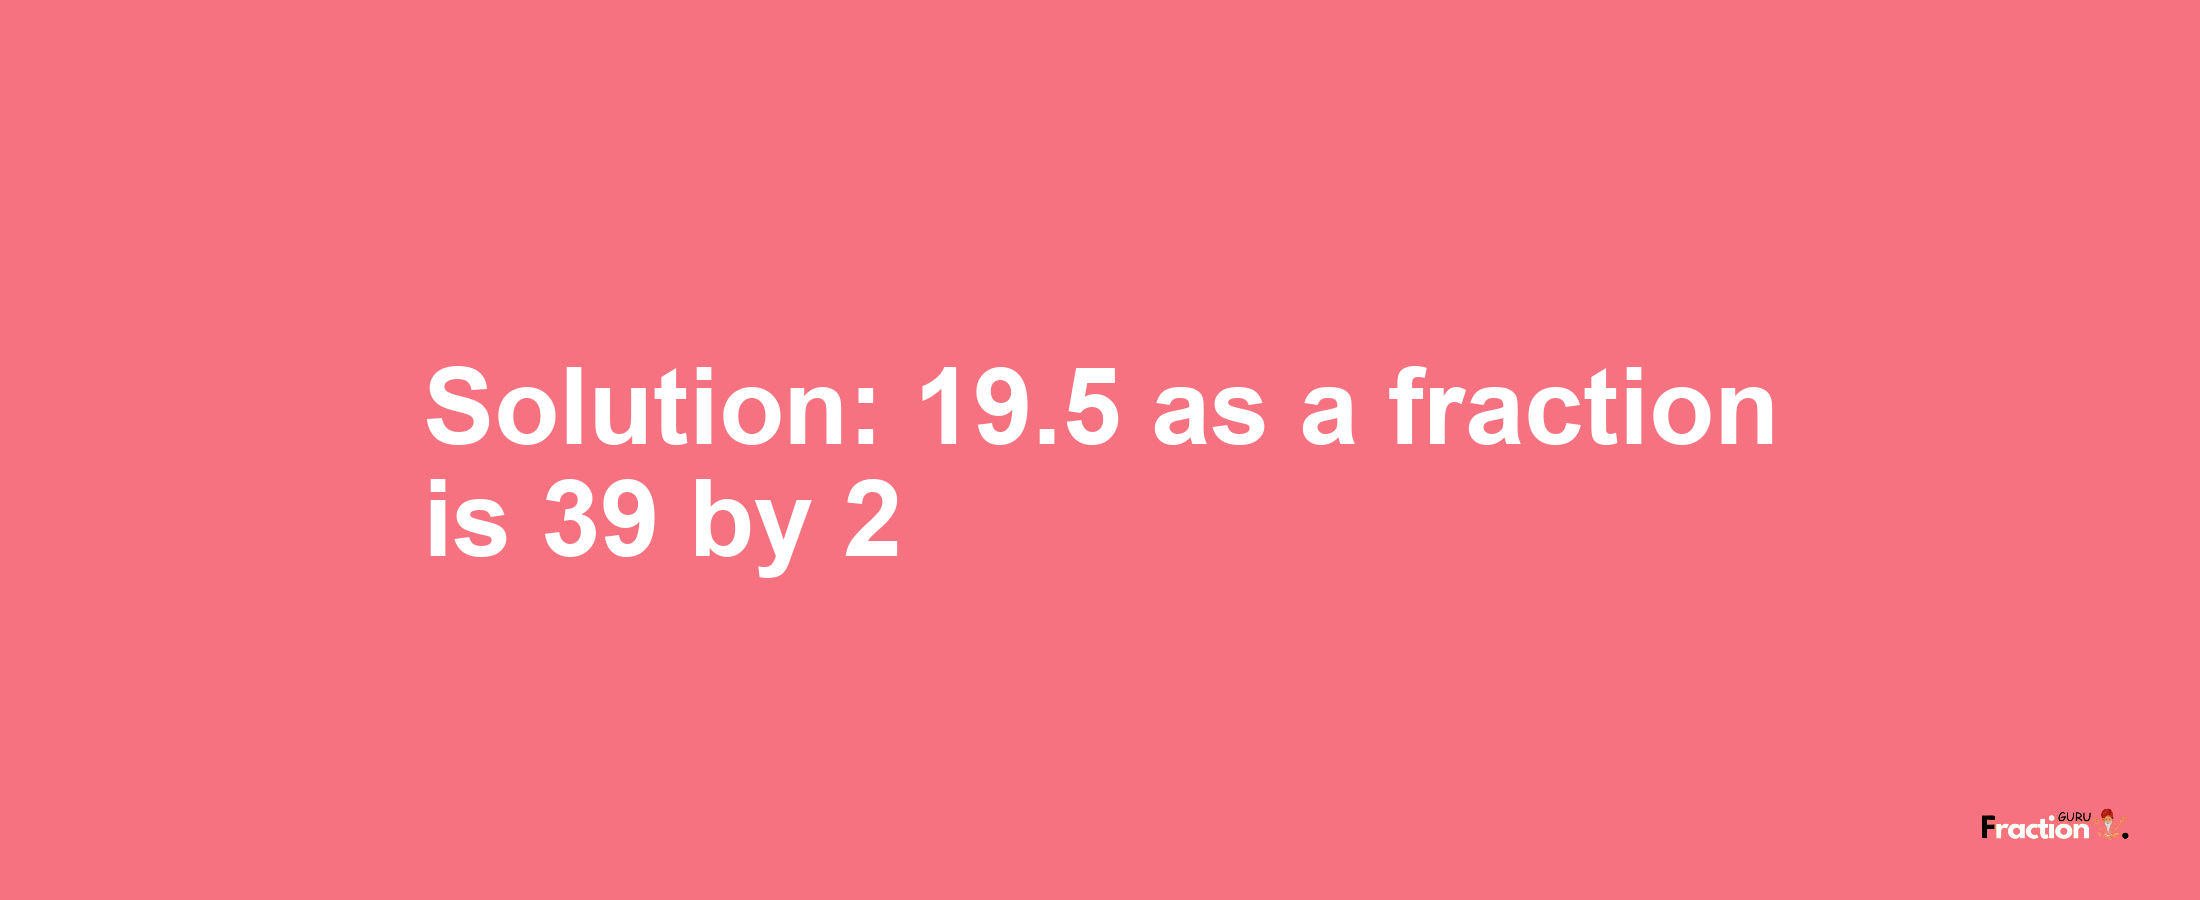 Solution:19.5 as a fraction is 39/2